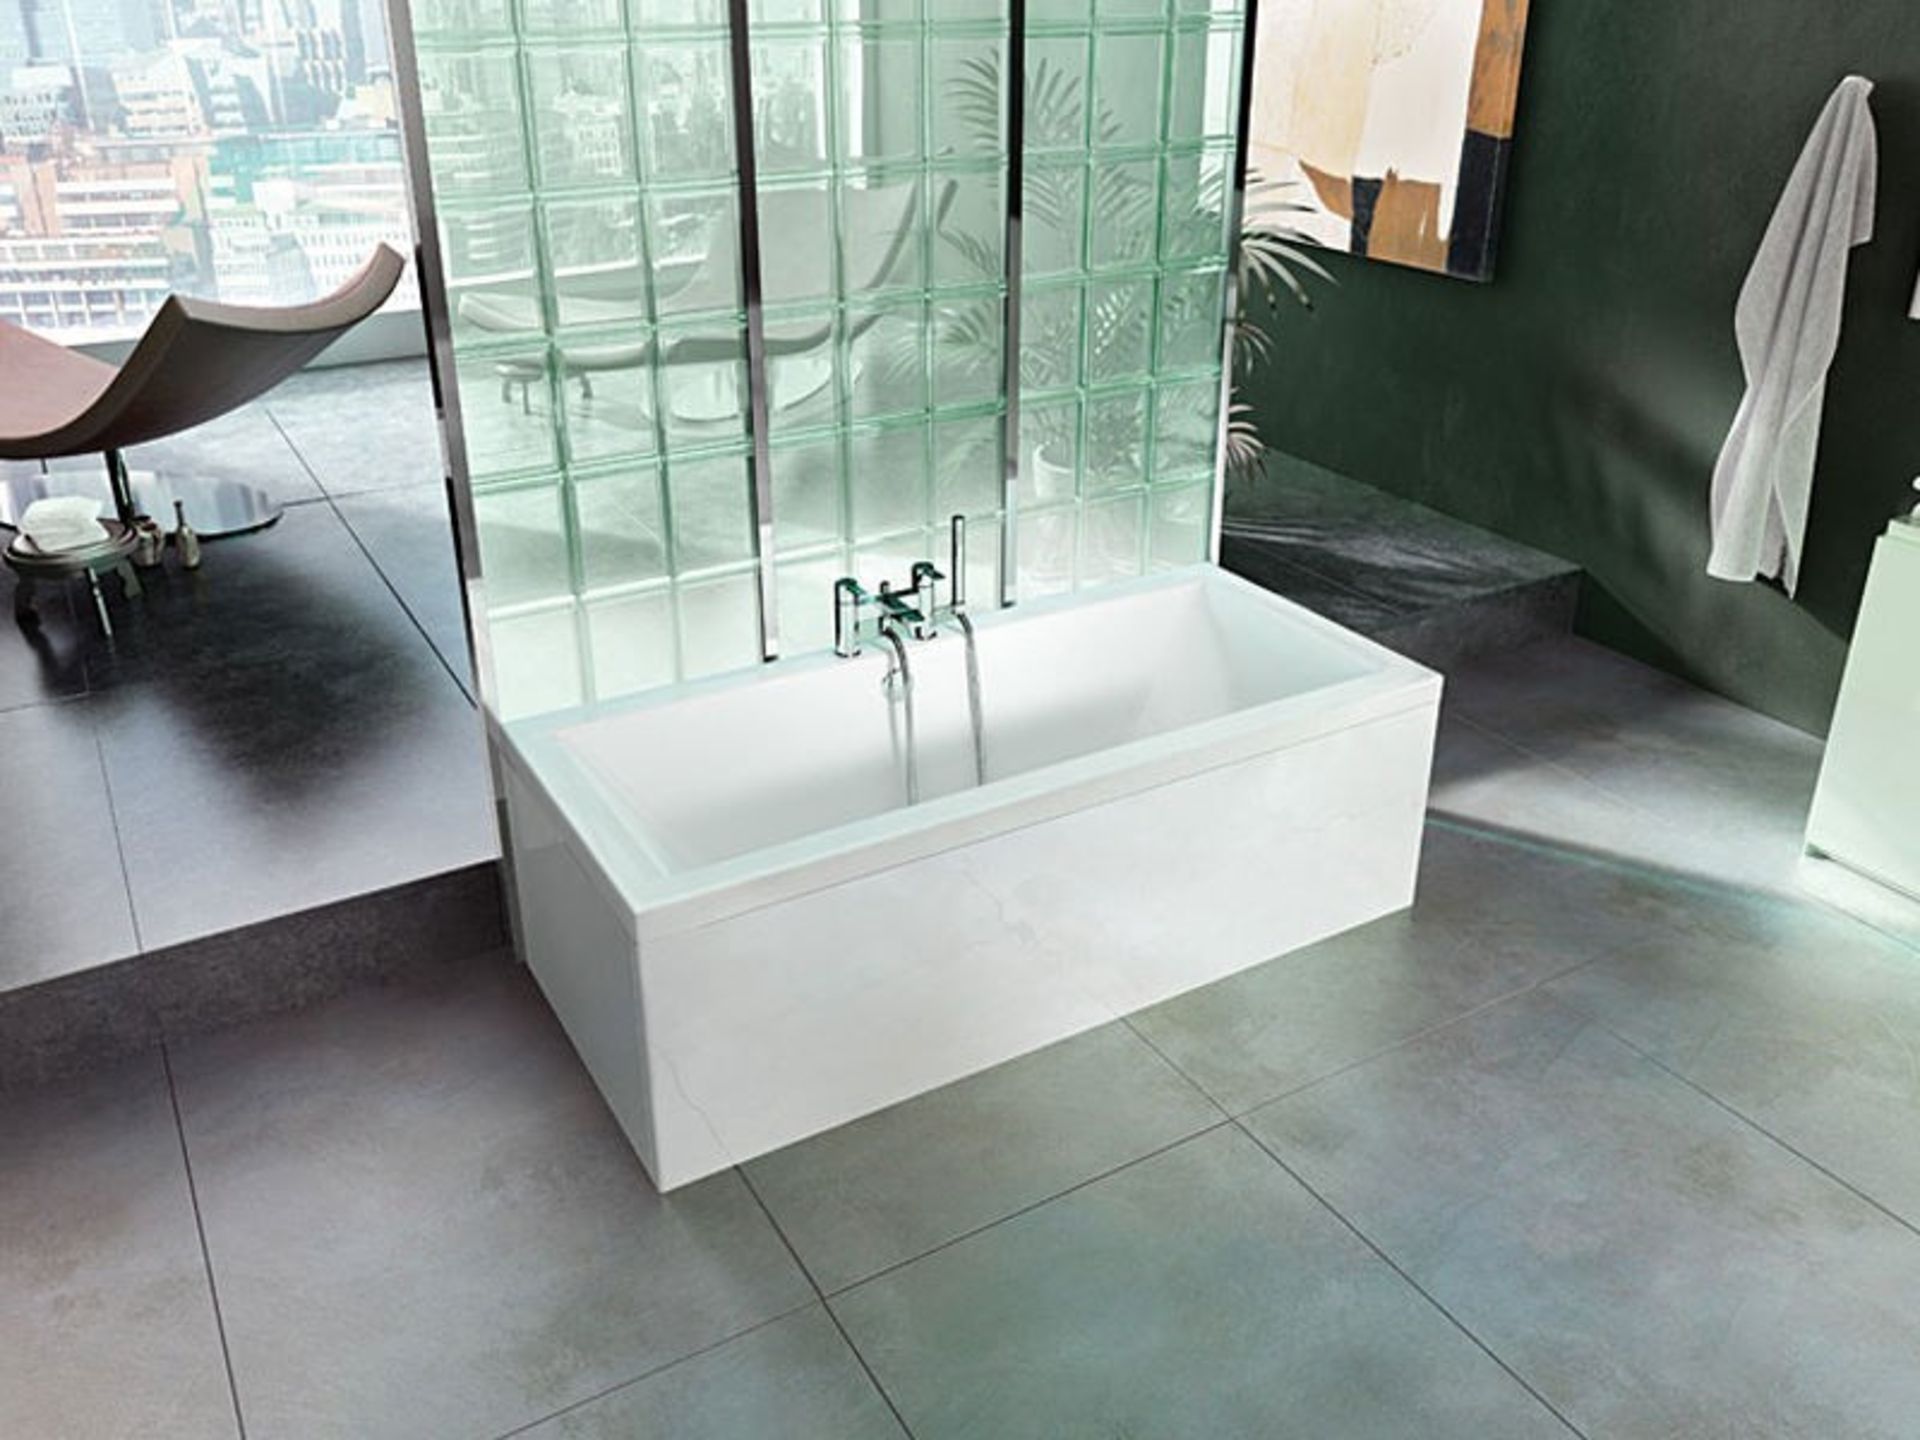 Twyford INDULGENCE 1700x750mm Rectangular Bath. White. RRP £928.99.Comes complete with side p...